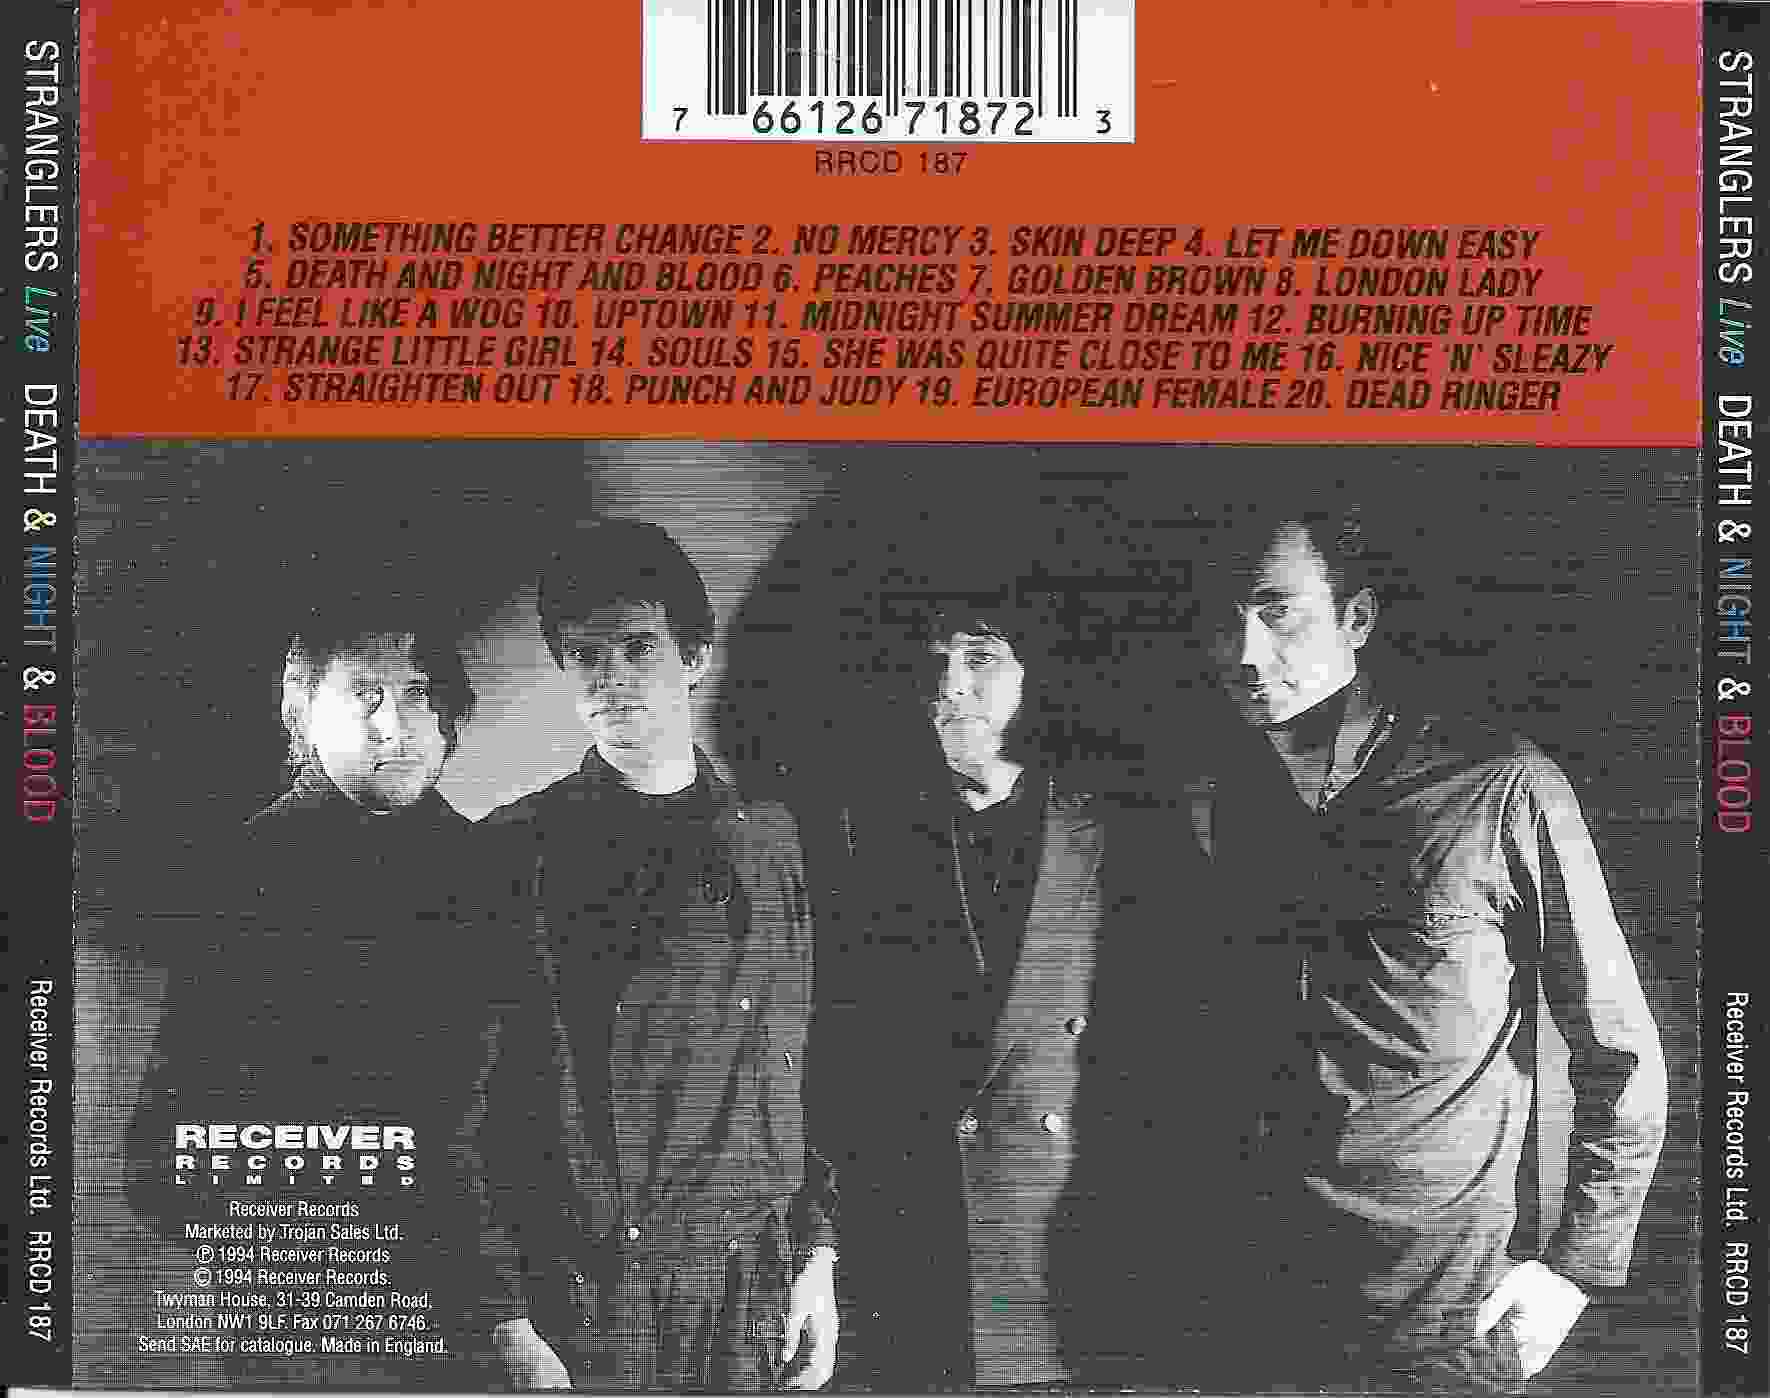 Picture of RRCD 187 Death & night & blood - Live by artist The Stranglers from The Stranglers